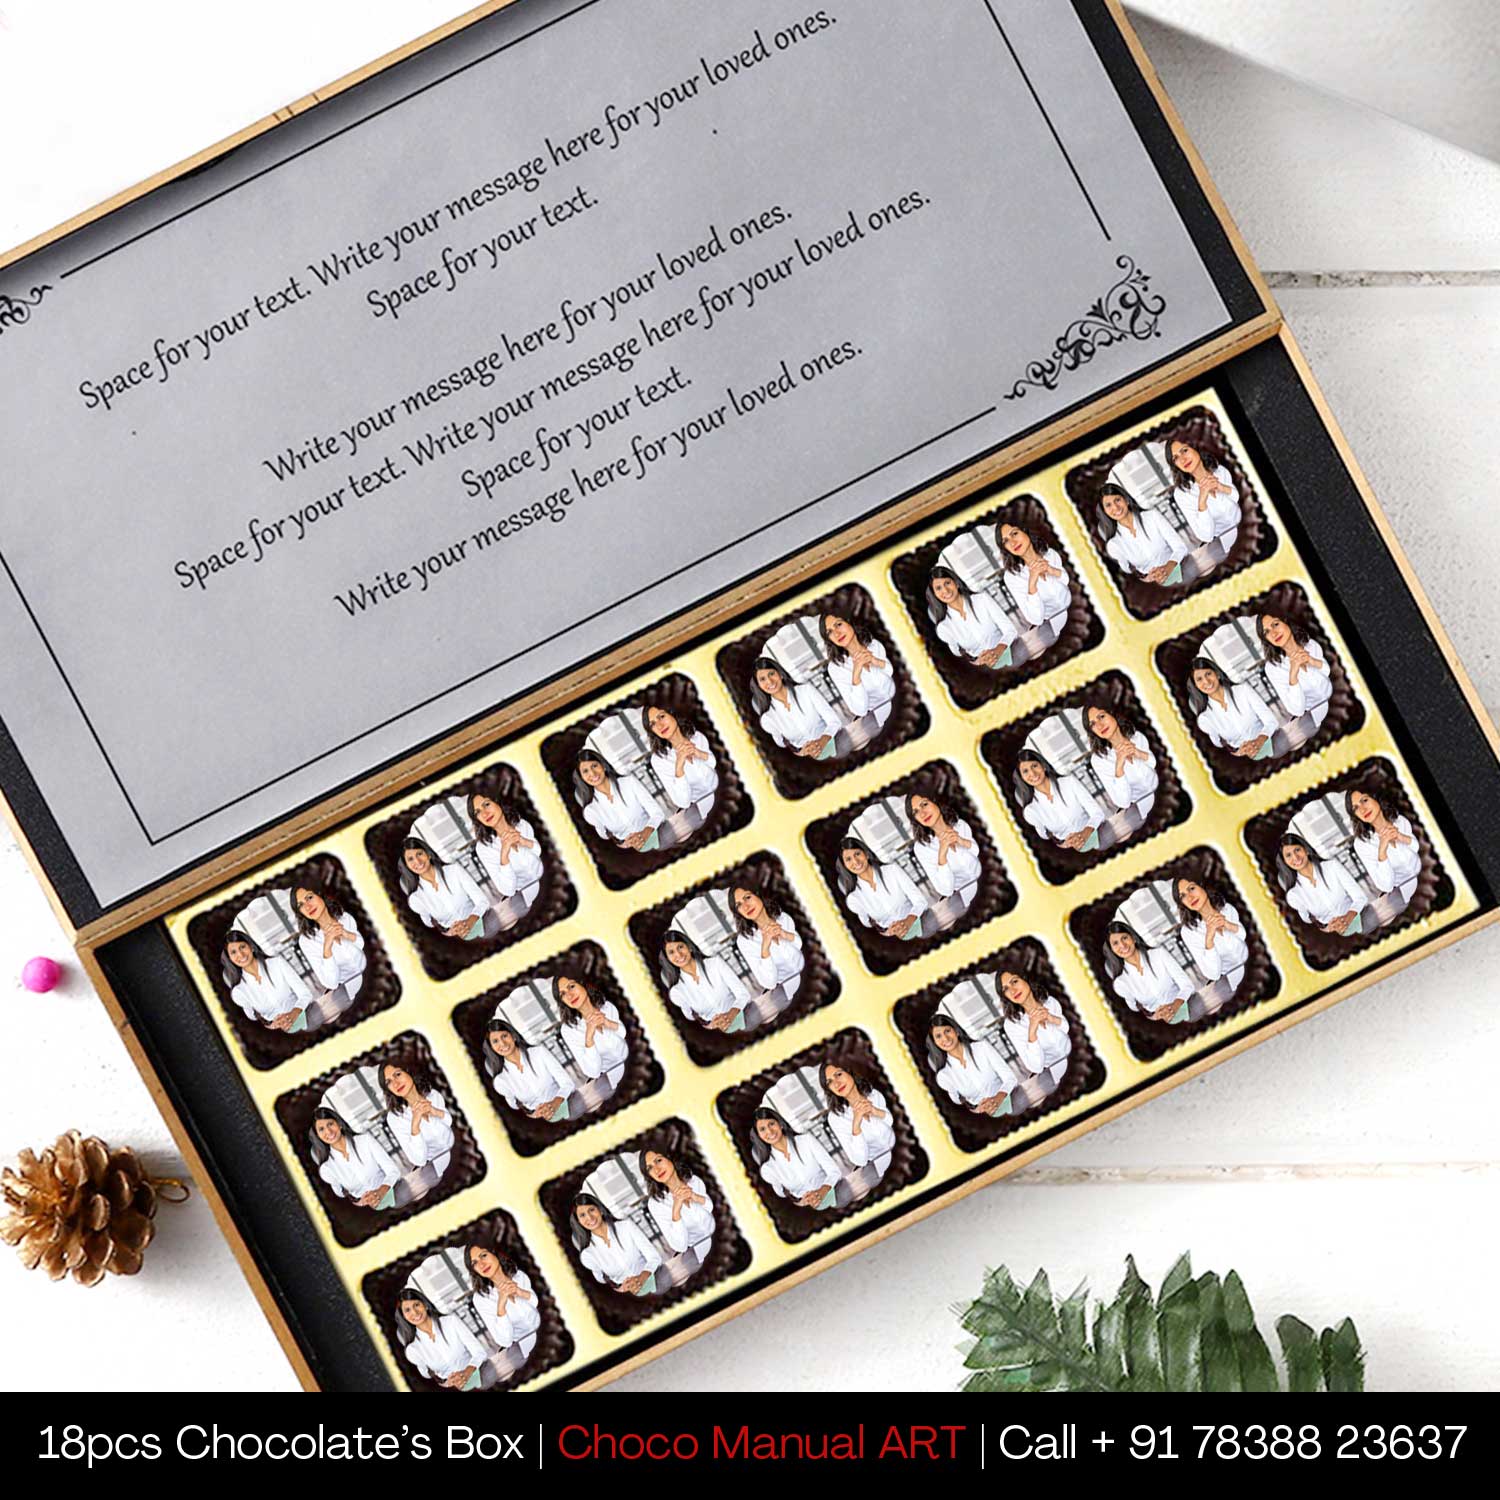  personalised chocolates with photo personalised chocolates with names customized chocolate box personalised chocolates with photo india personalised chocolates for birthdays customized chocolate box near me customized chocolate gifts customized chocolate wrappers